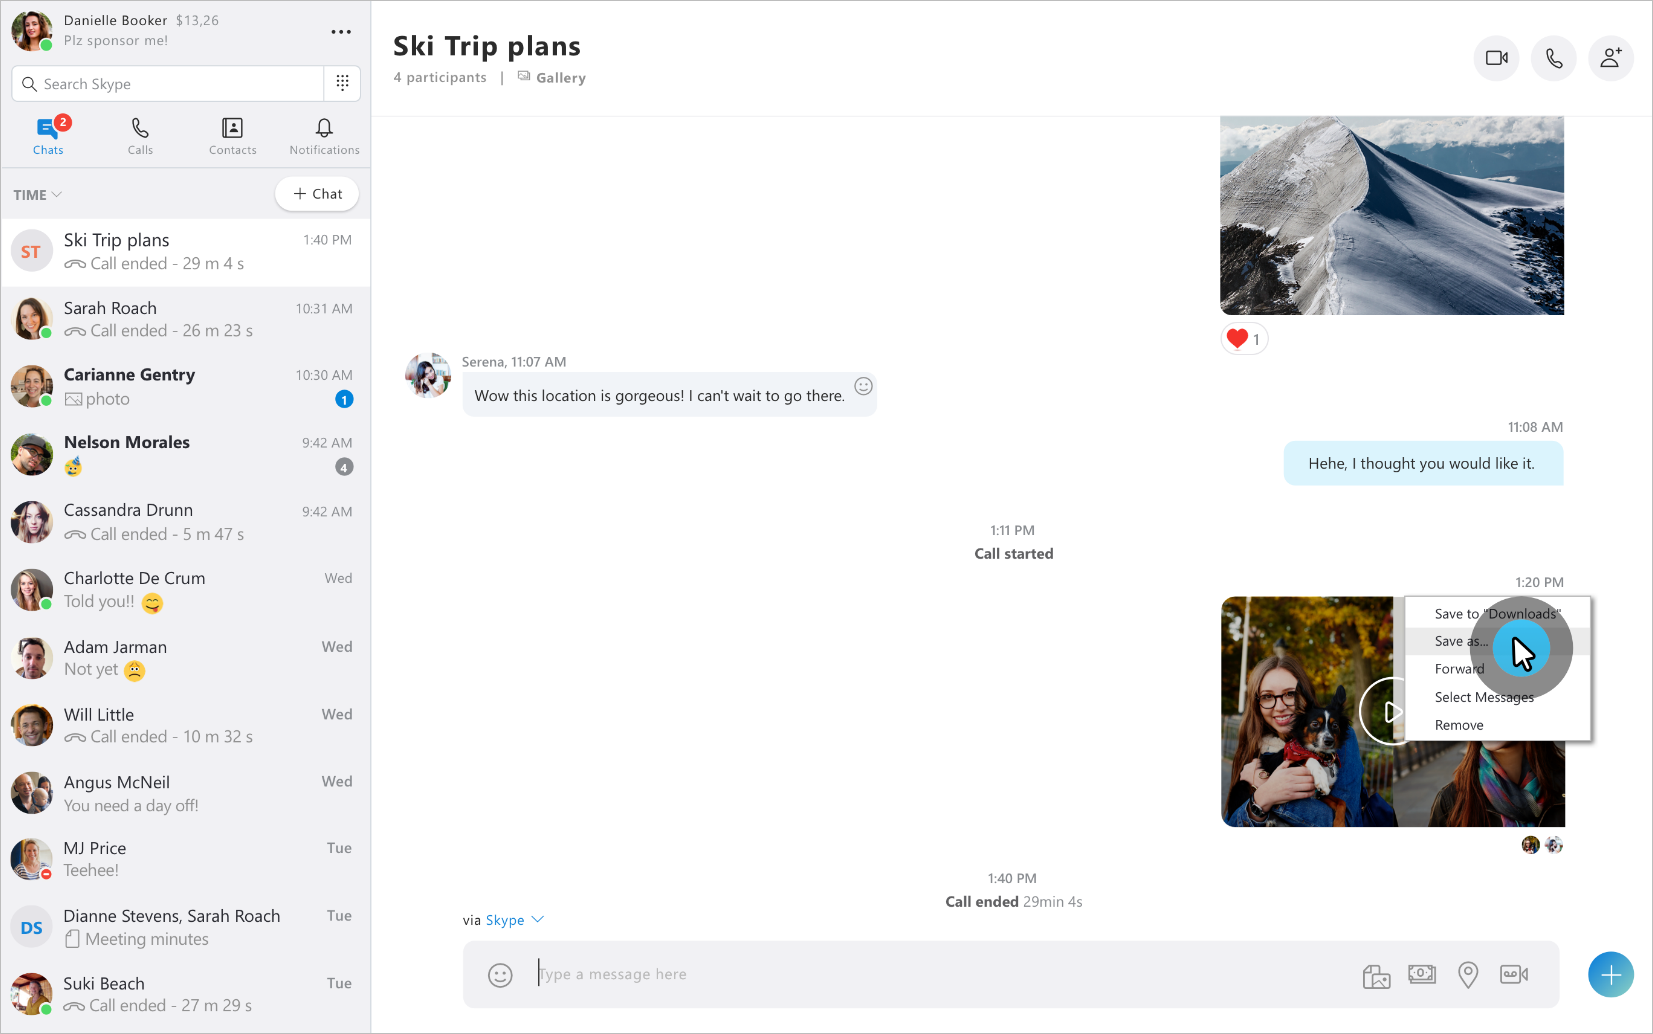 Skype Preview version 8.43.76.38 Introduces Screen Sharing on Mobile Introducing-Skype-call-recording-5-1.png